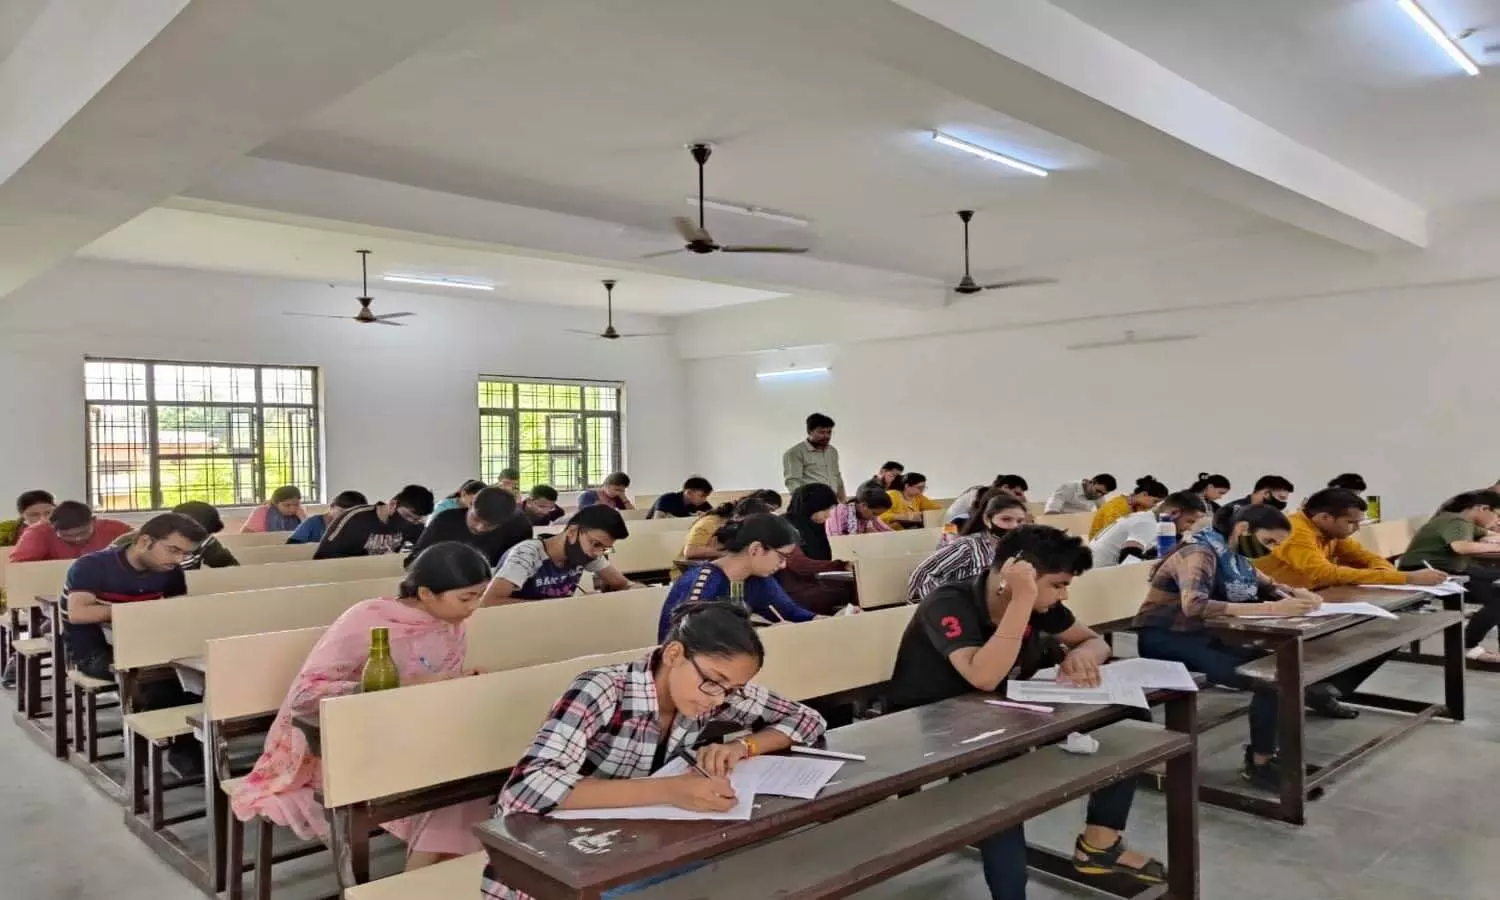 Lucknow University: Super-30 entrance exam held after two years, NET-JRF coaching will be given free